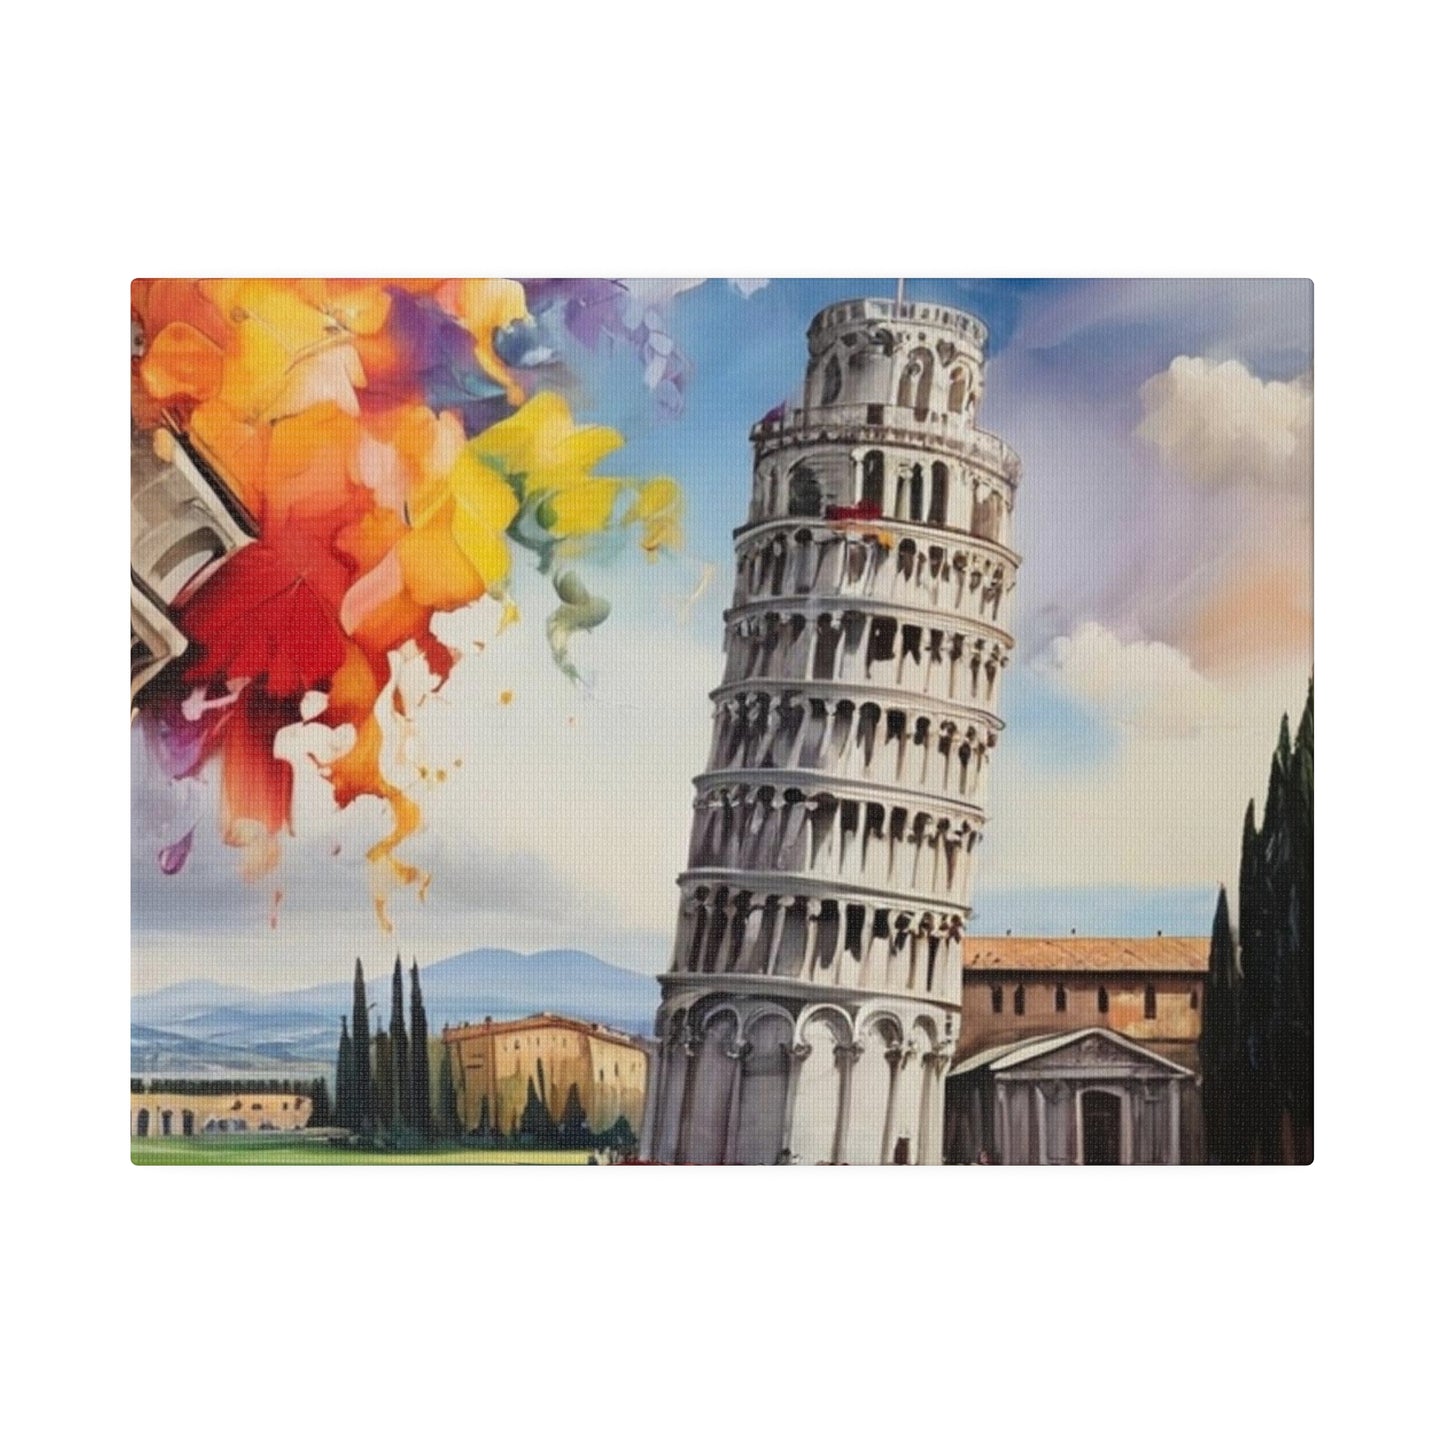 Leaning Tower of Pisa - Matte Canvas, Stretched, 0.75"